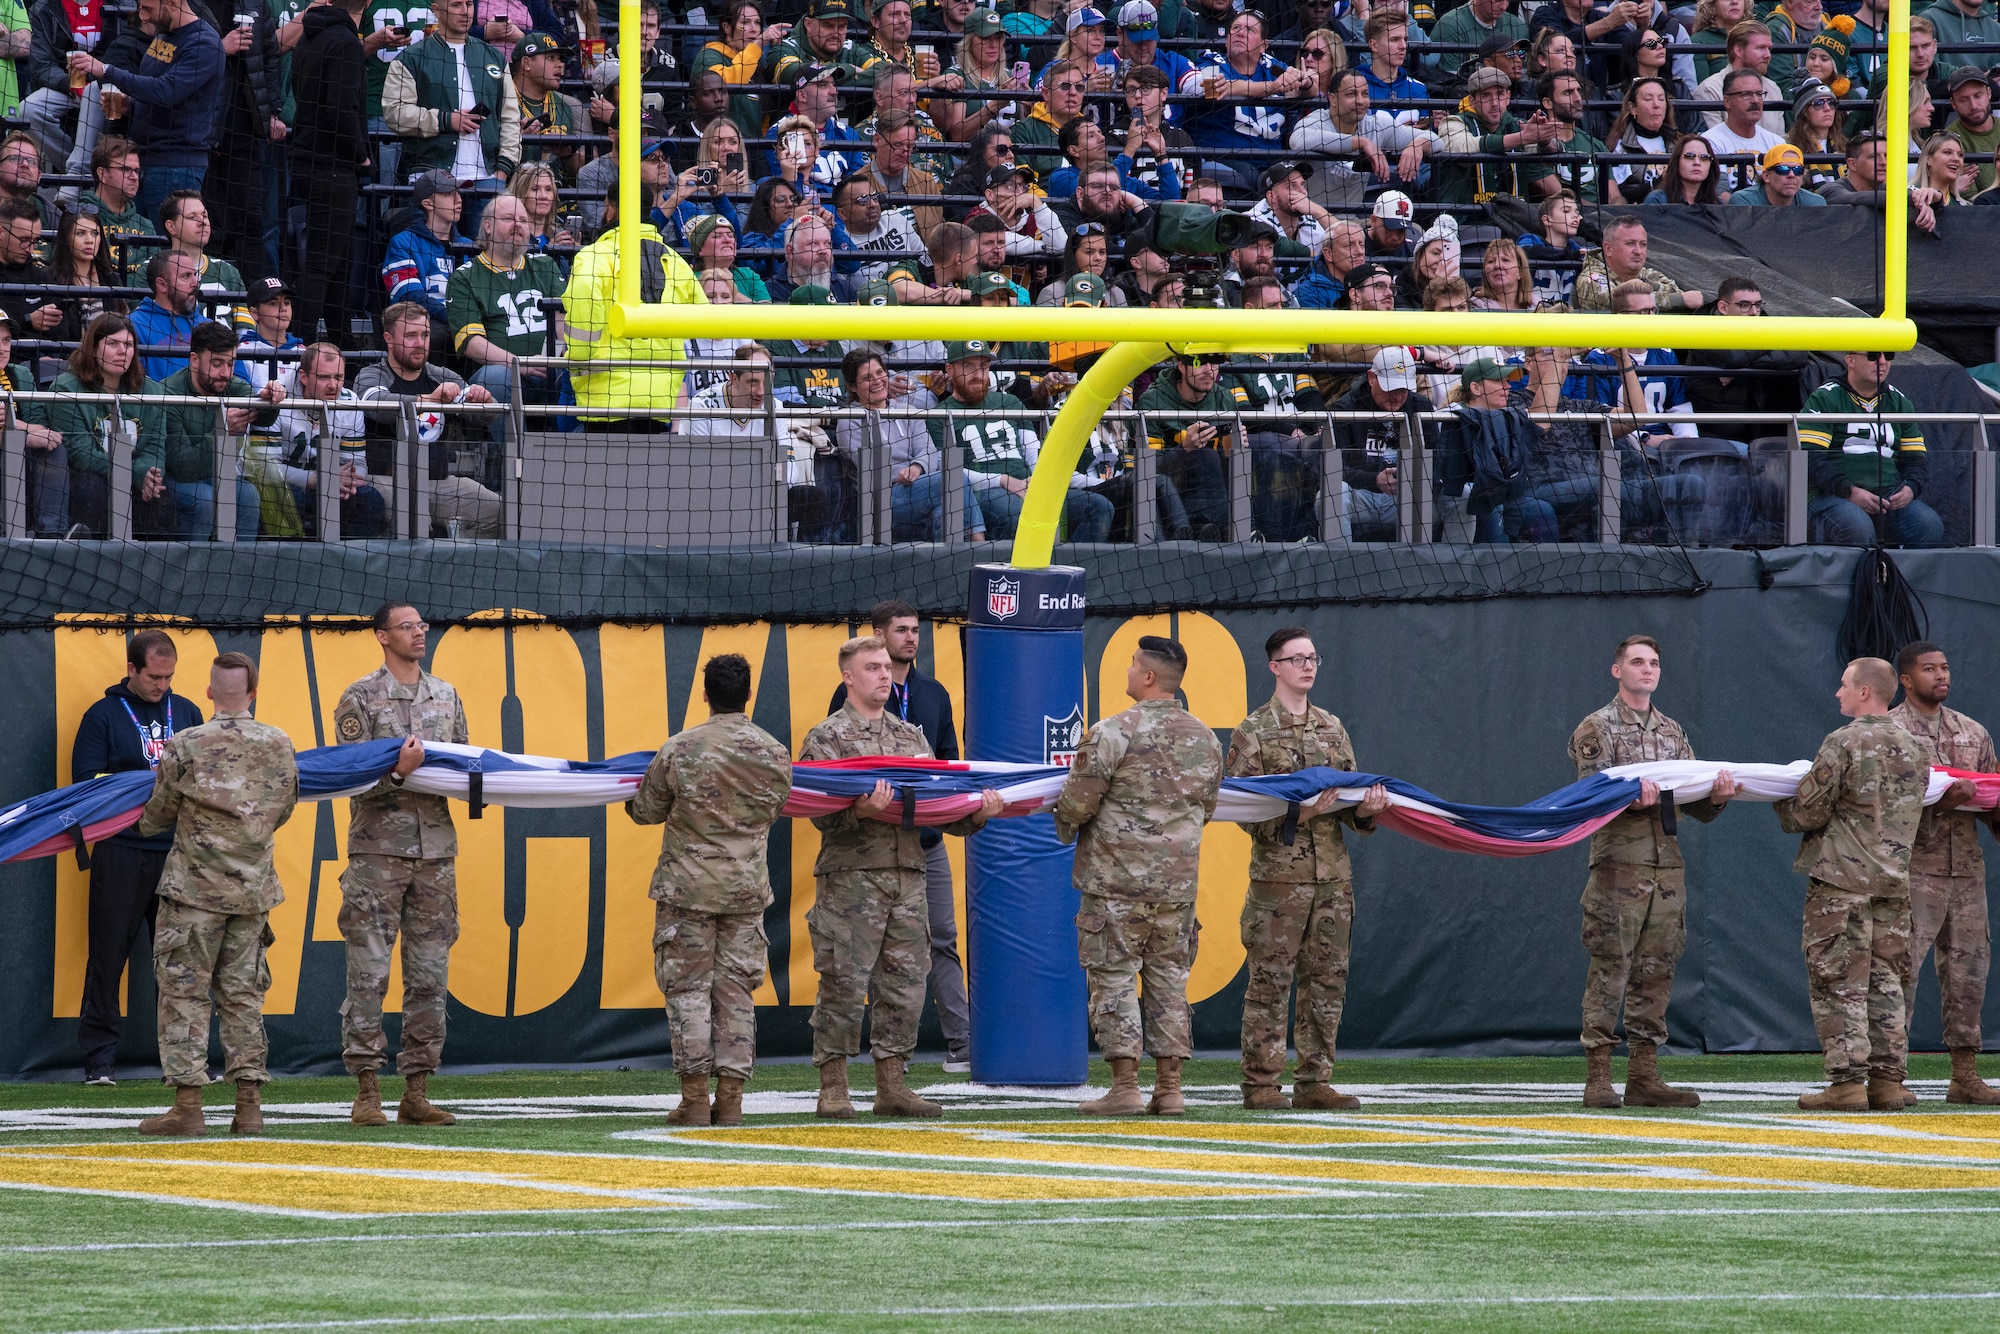 U.S. Airmen assigned to Royal Air Force Mildenhall and RAF Lakenheath prepare to unfurl the U.S. Flag prior to the pre-game ceremony of the National Football League’s New York Giants vs. Green Bay Packers game at Tottenham Hotspur Stadium, in London, England, Oct. 9, 2022. The pre-game ceremony featured more than 50 Airmen unfurling the flag along with an honor guard team and vocalist to sing the U.S. National Anthem. (U.S. Air Force photo by Tech. Sgt. Anthony Hetlage)